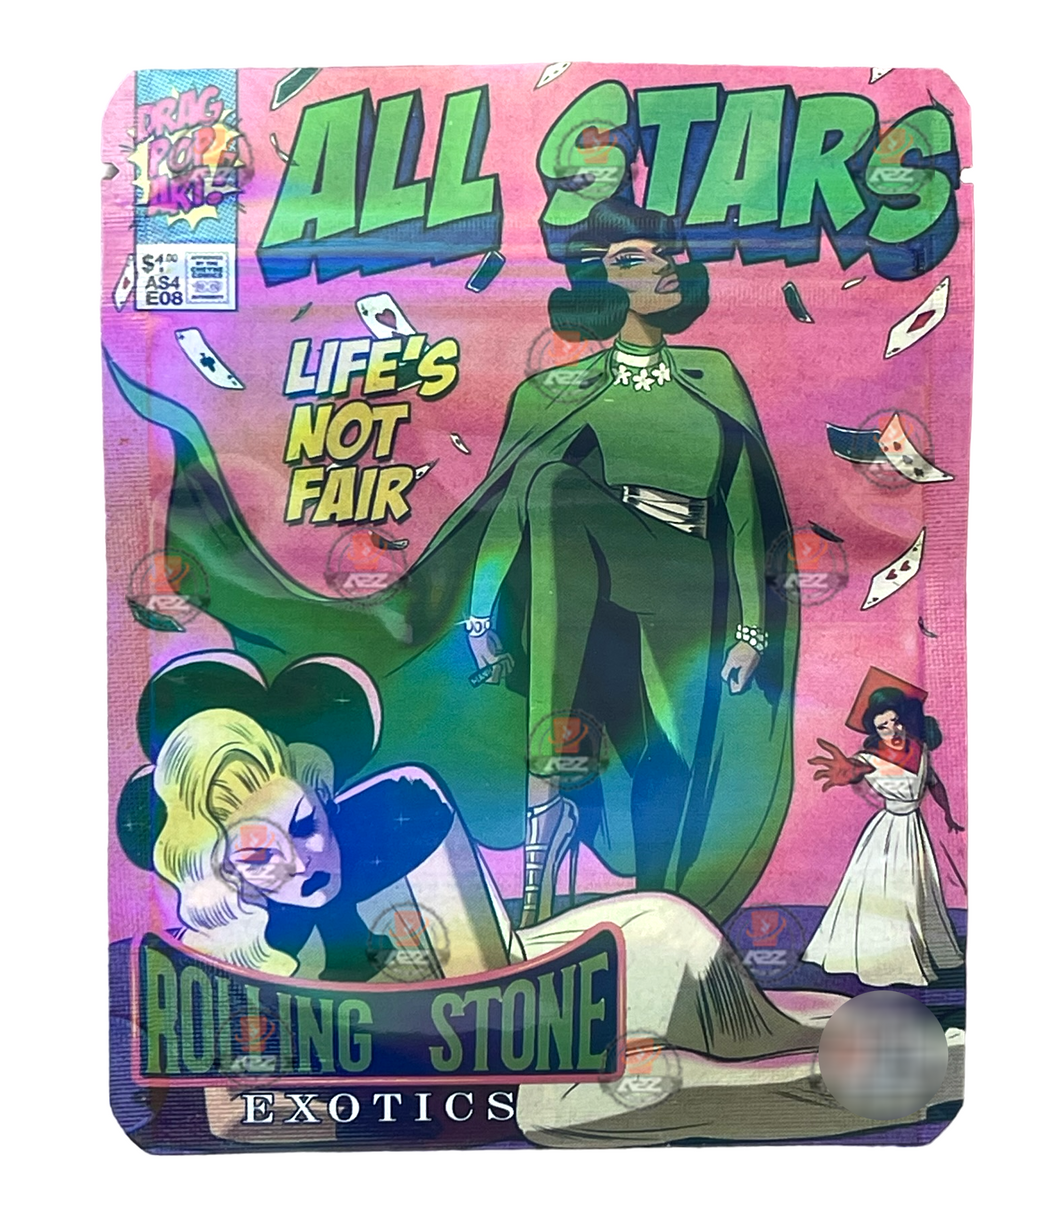 All Stars Mylar Bags 3.5g Holographic Rolling Stone Exotics